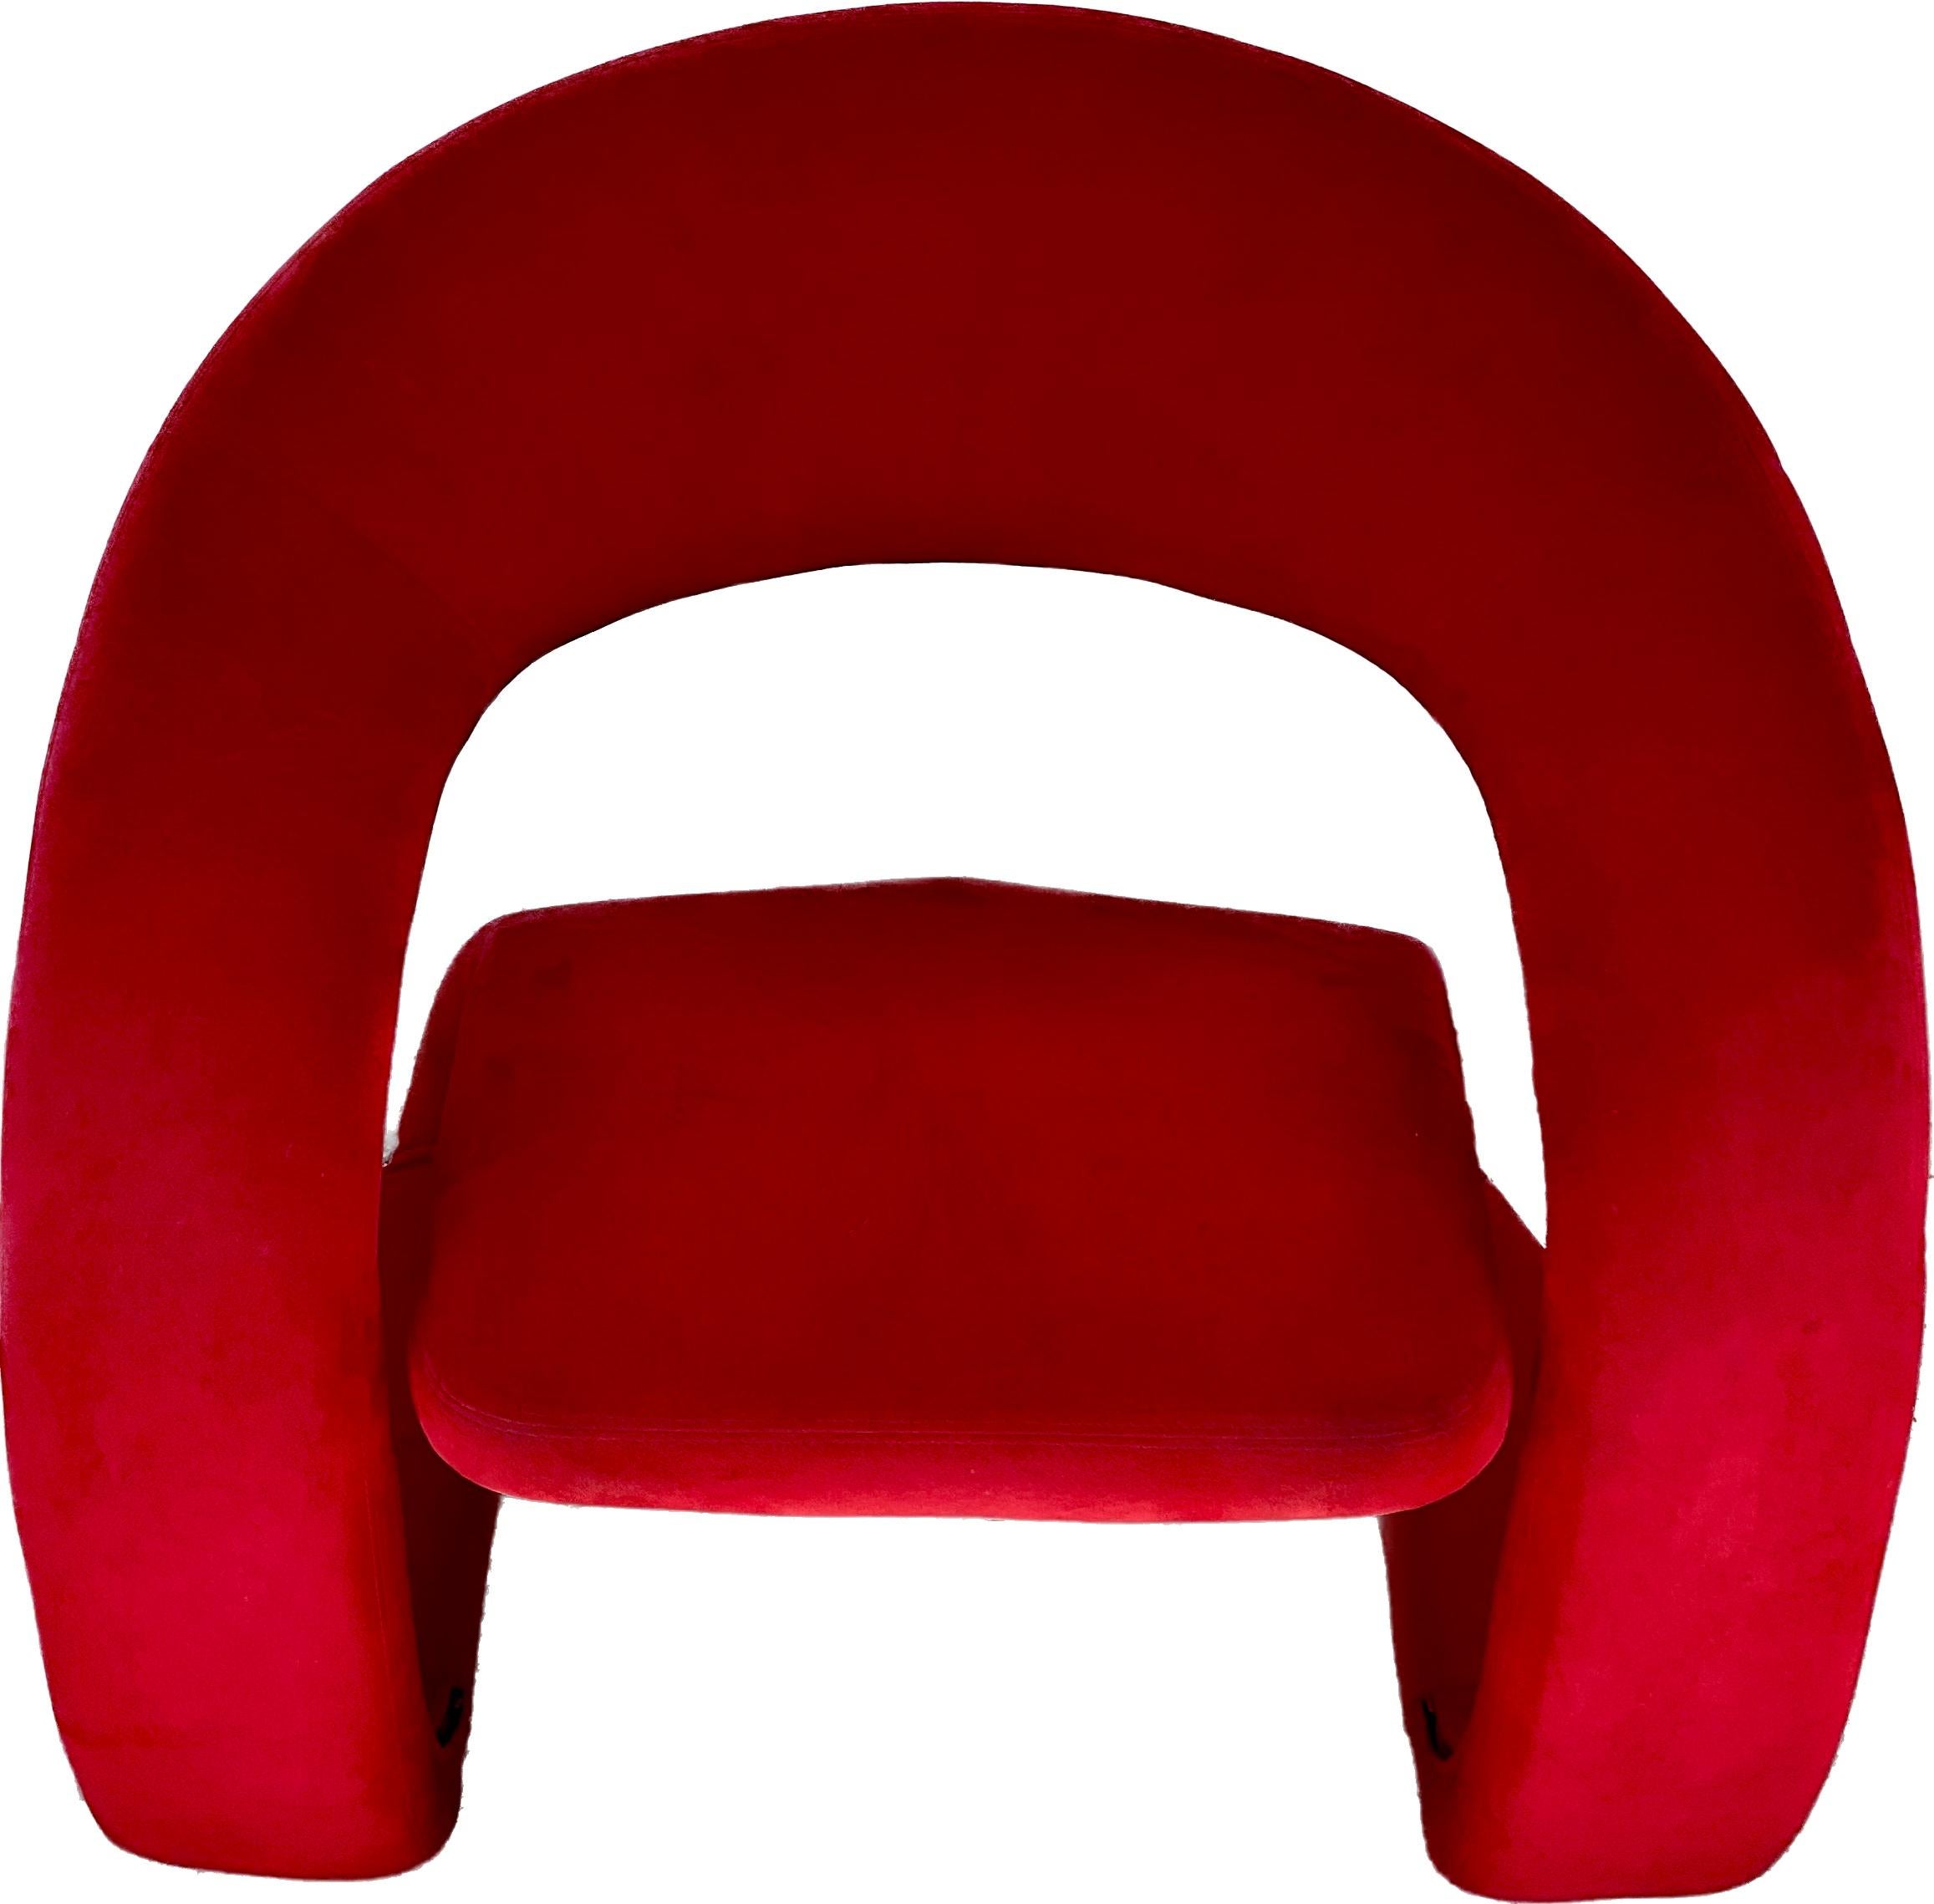 Very cool looking and comfortable lounge chair manufactured by Jaymar. This chair has a unique and curvy sculptural design and is upholstered in the original red colored micro suede upholstery.